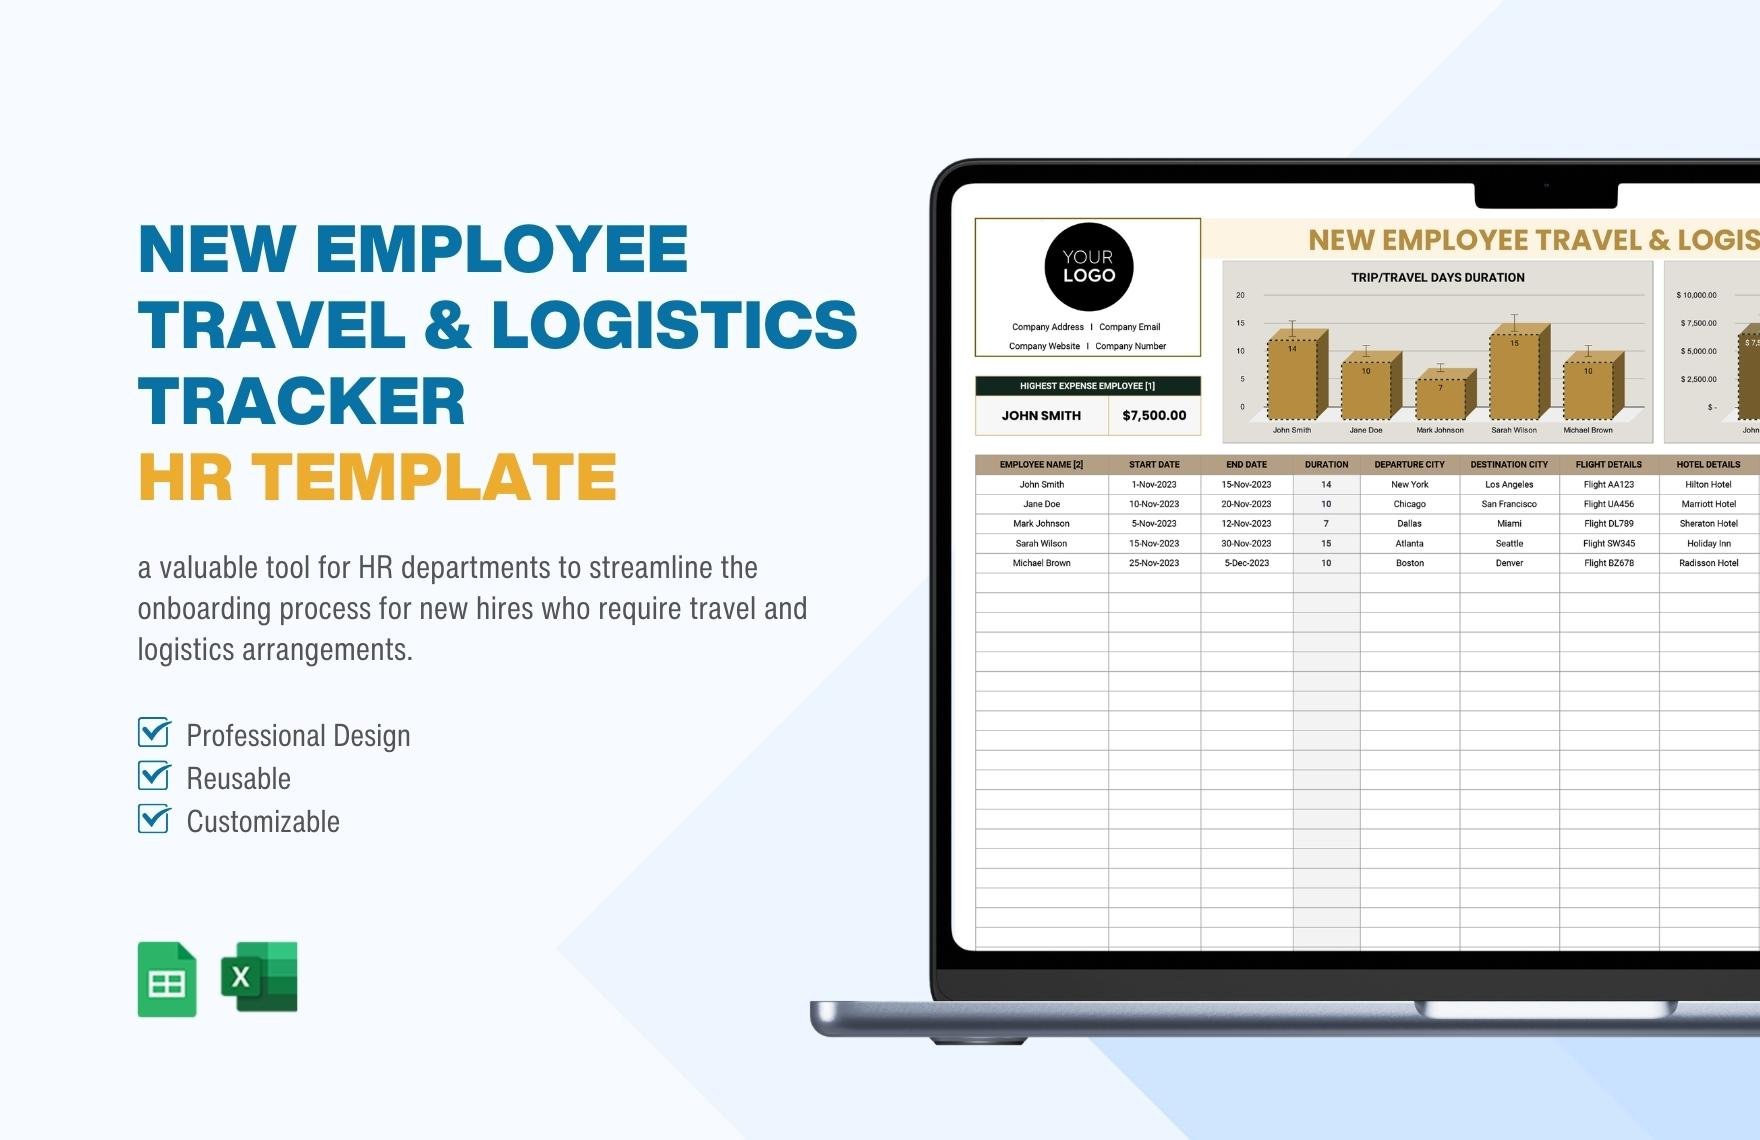 New Employee Travel & Logistics Tracker HR Template in Excel, Google Sheets